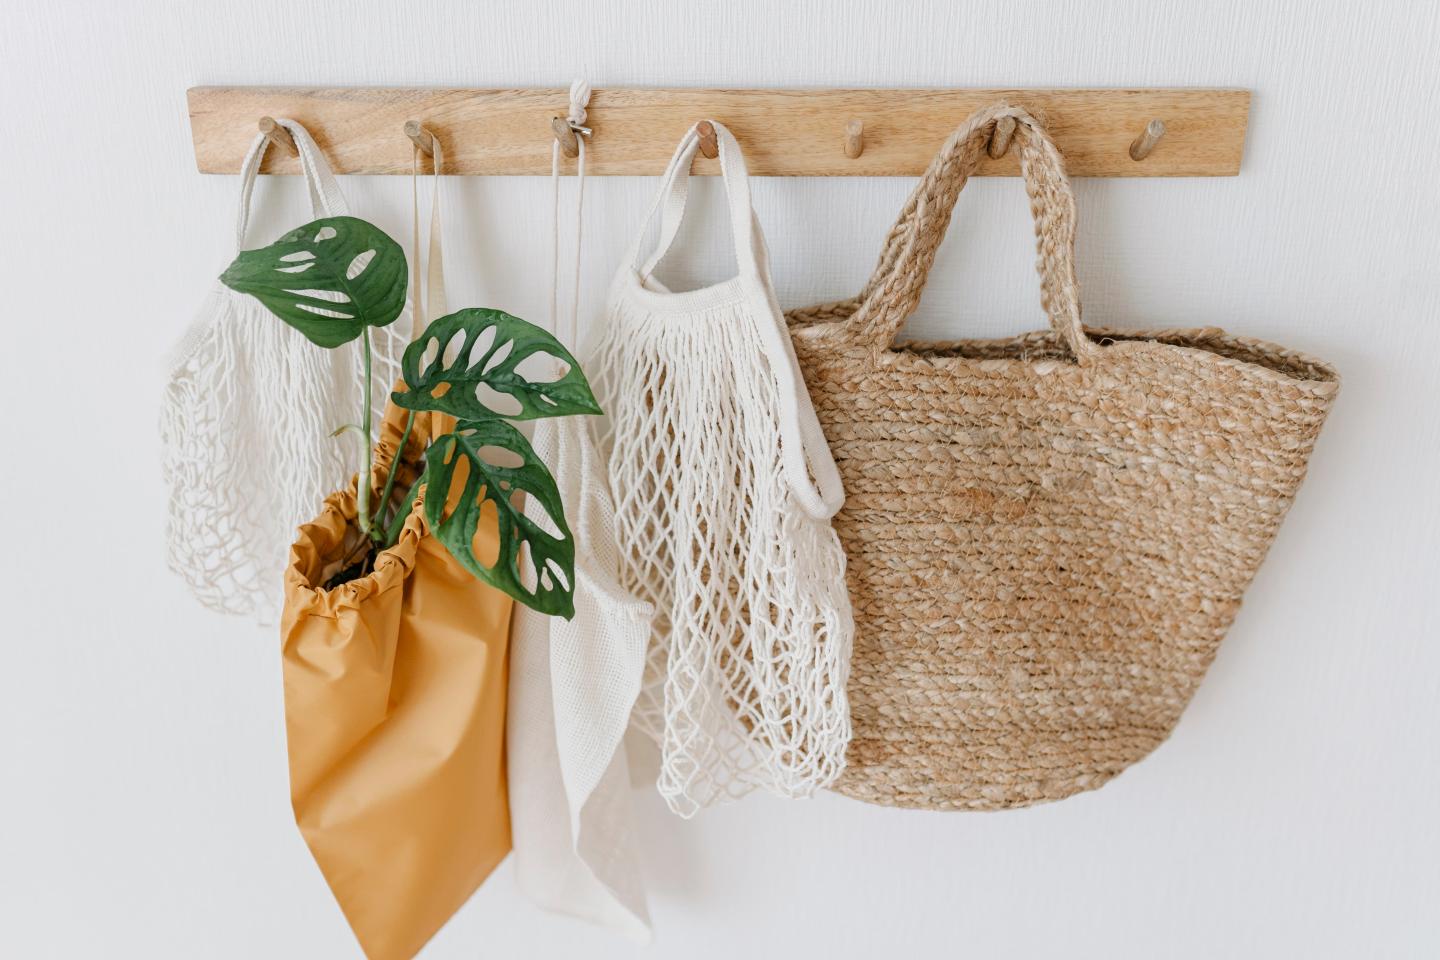 Tote bags hanging on hooks